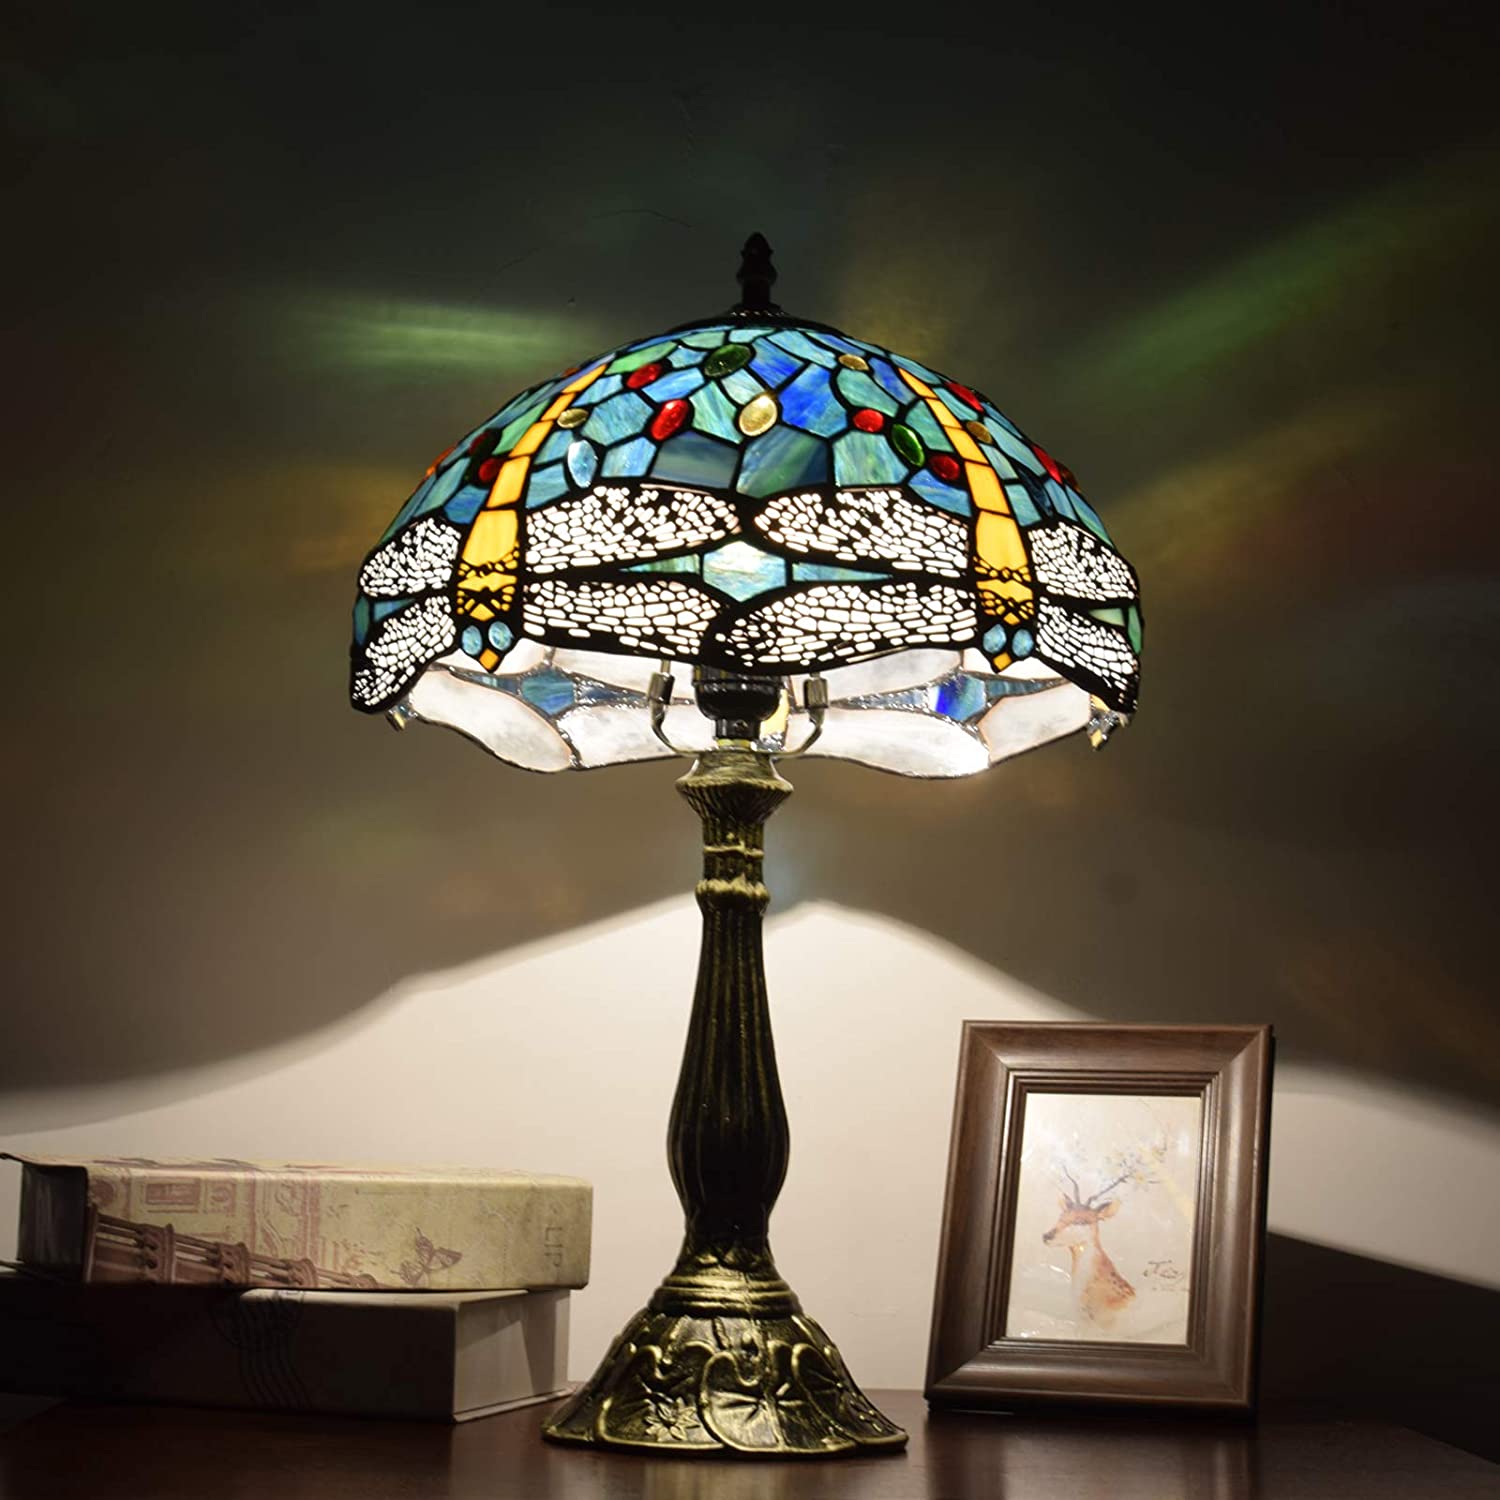 SHADY  Lamp Stained Glass Lamp Dragonfly Green Bedroom Table Lamp Reading Desk Light for Bedside Living Room Office Dormitory Dining Room Decorate  12x12x18 Include Light Bulb